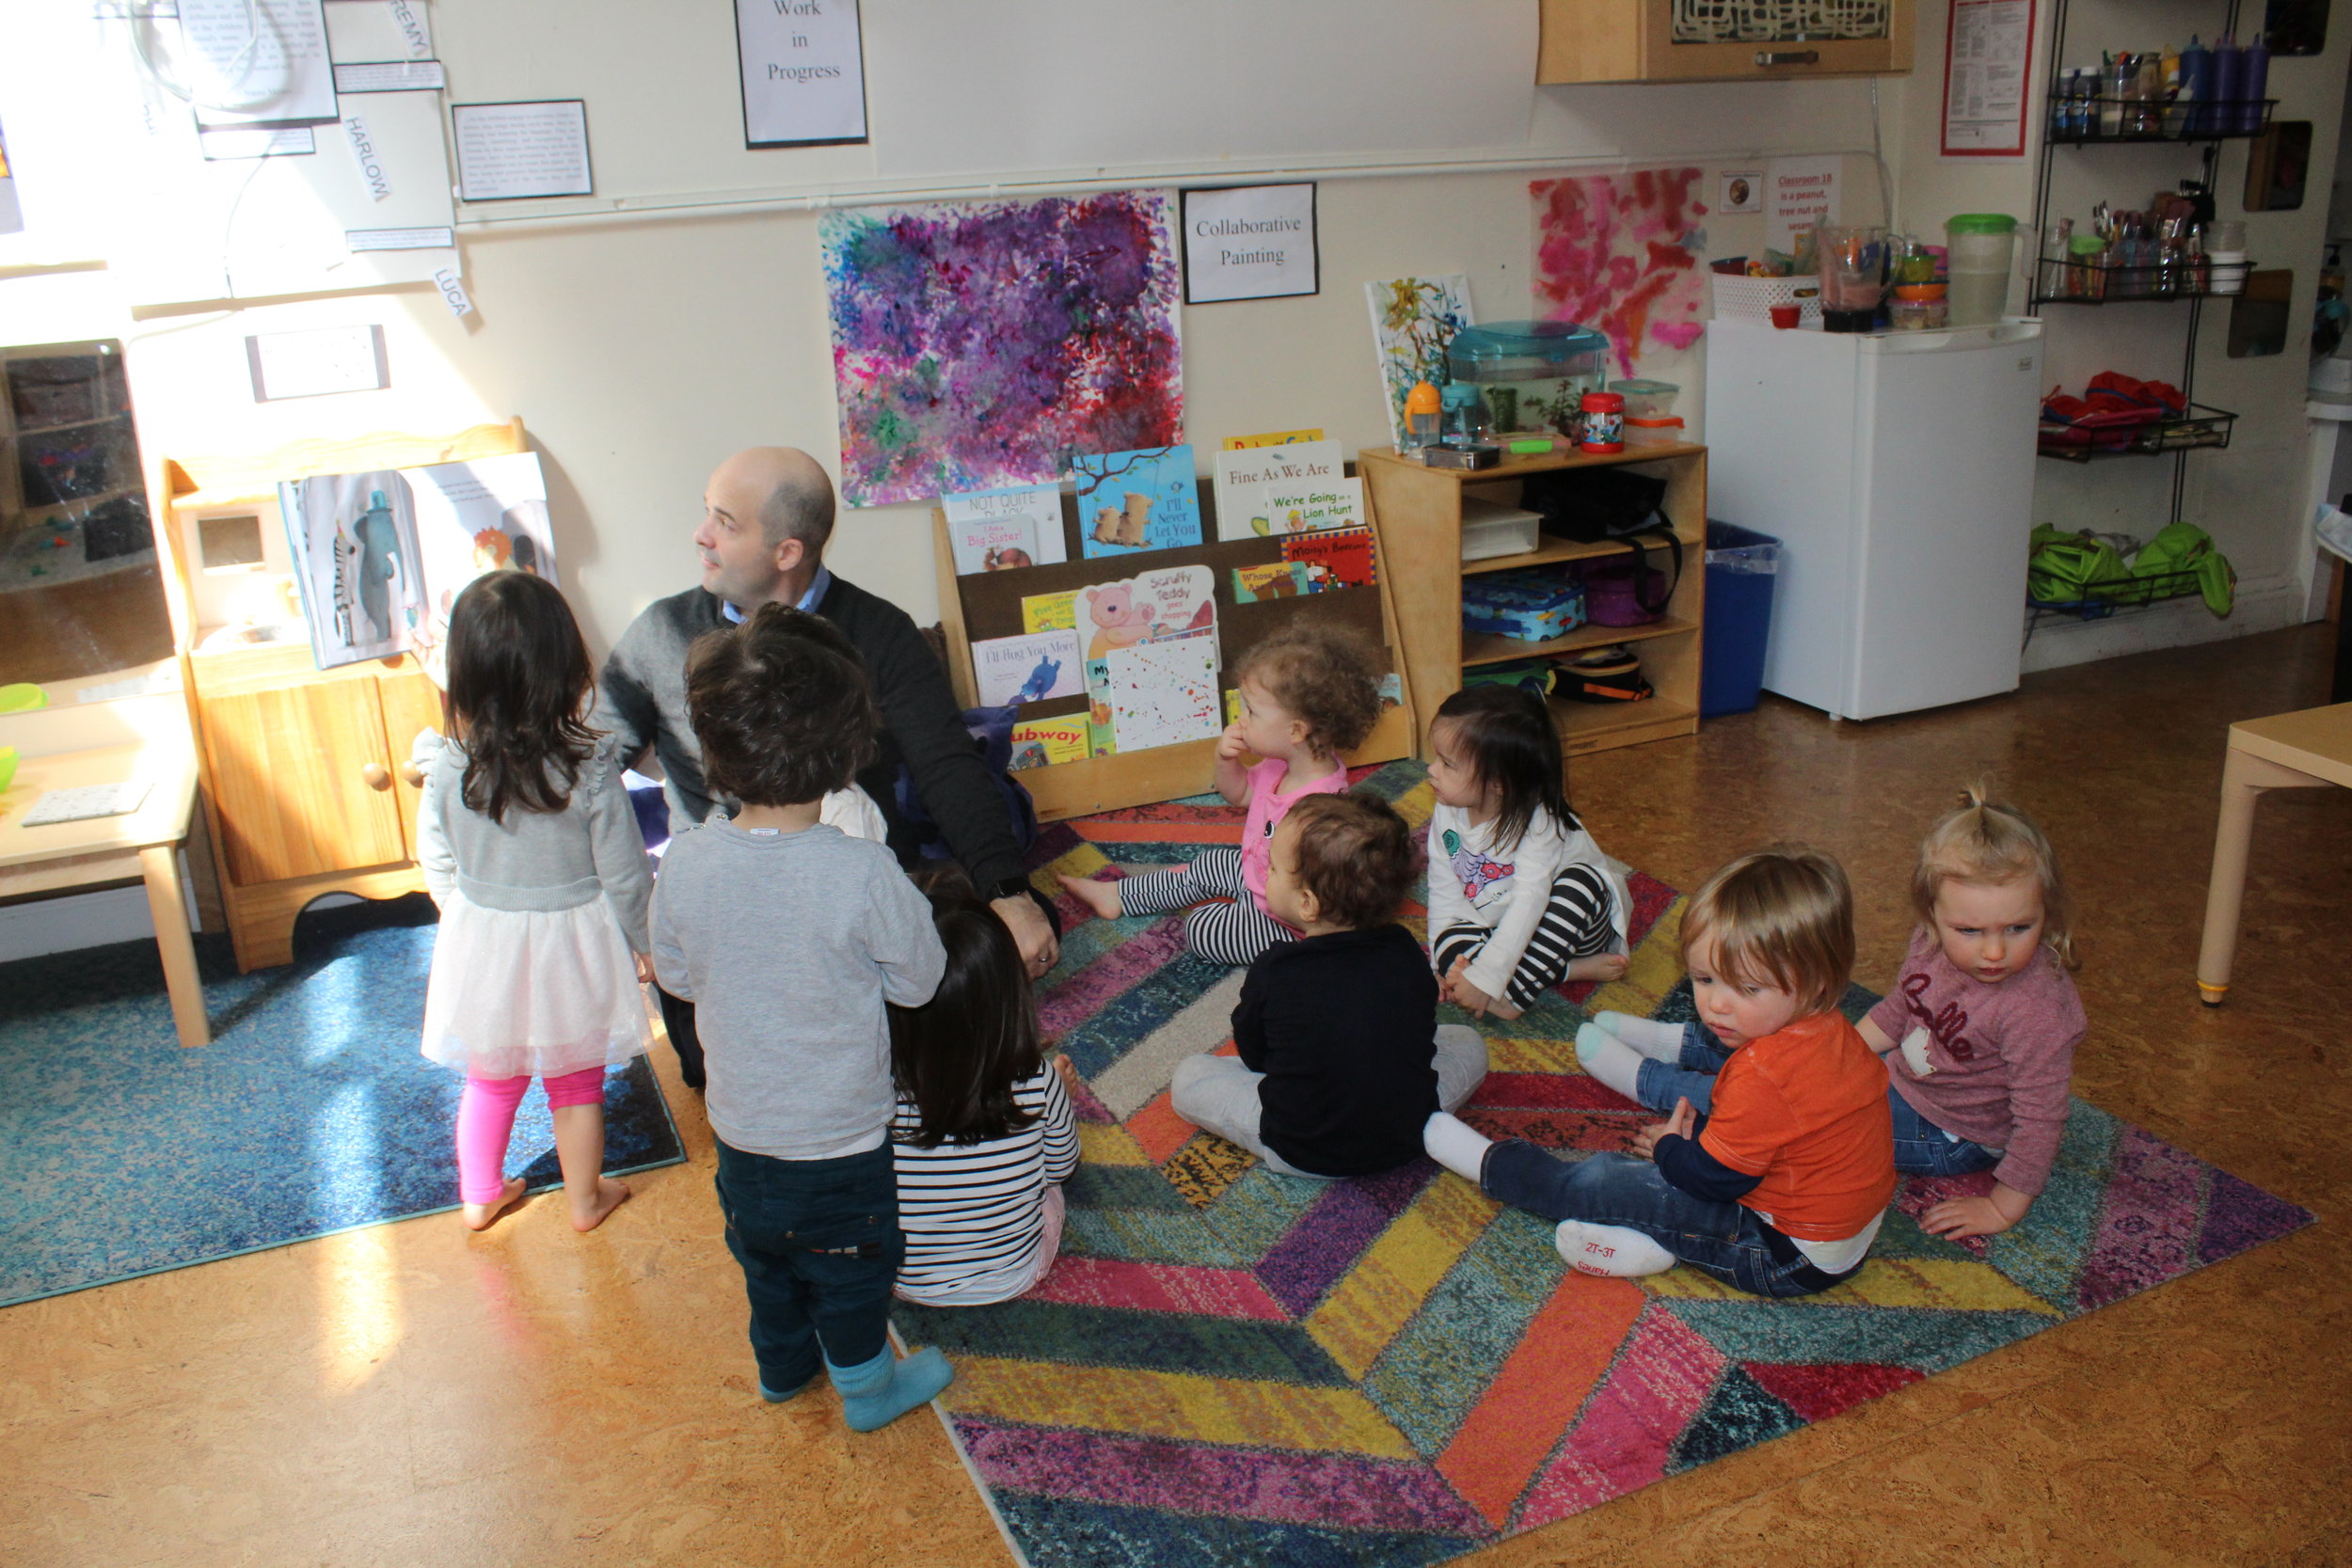  Arturo, Mario's father came to read to the children after lunch.&nbsp; The children were excited to see and hear him read.&nbsp;&nbsp; 